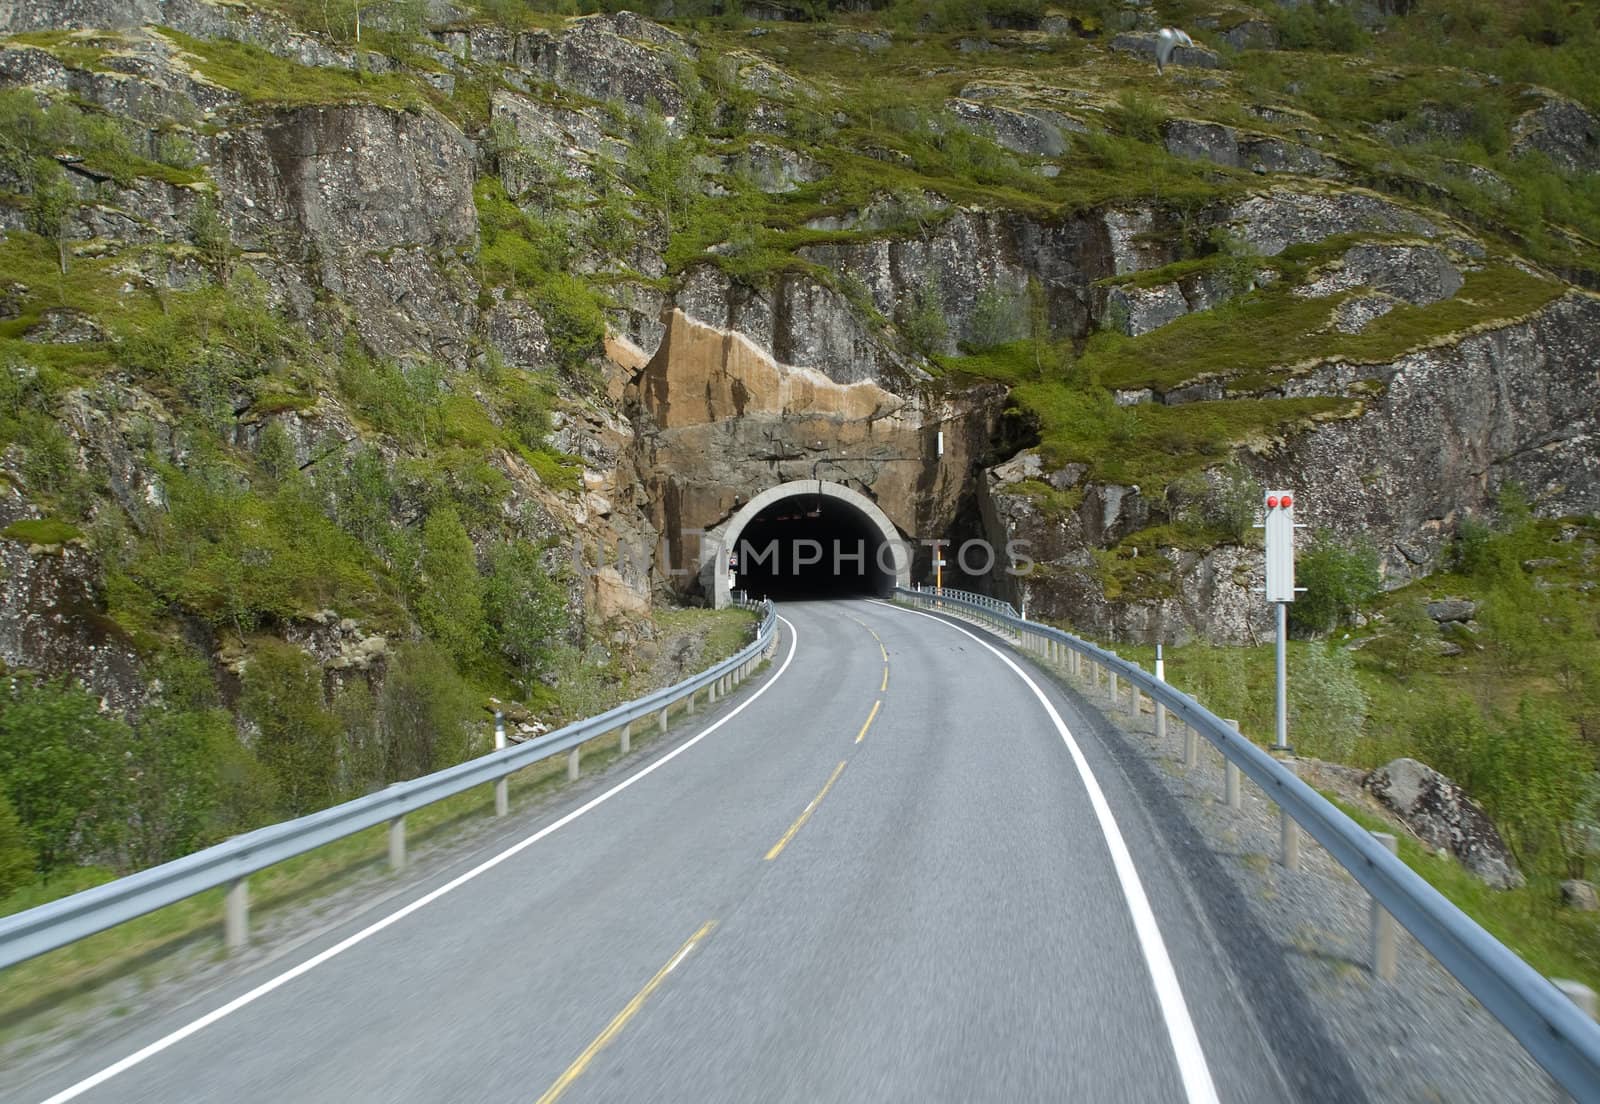 Road tunnel in norwegian mountains